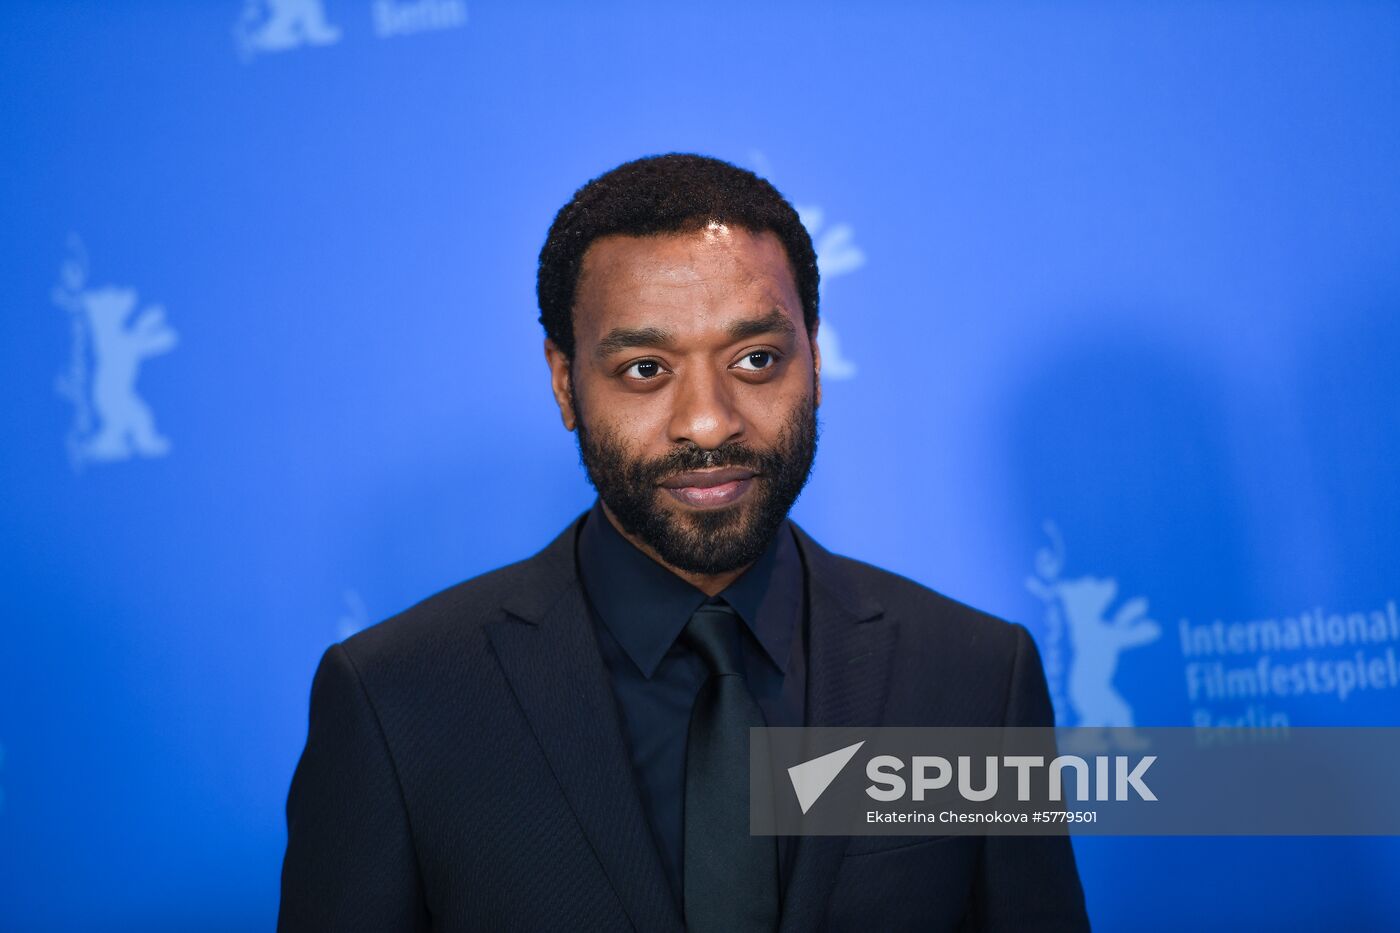 Germany Berlinale The Boy Who Harnessed The Wind Movie